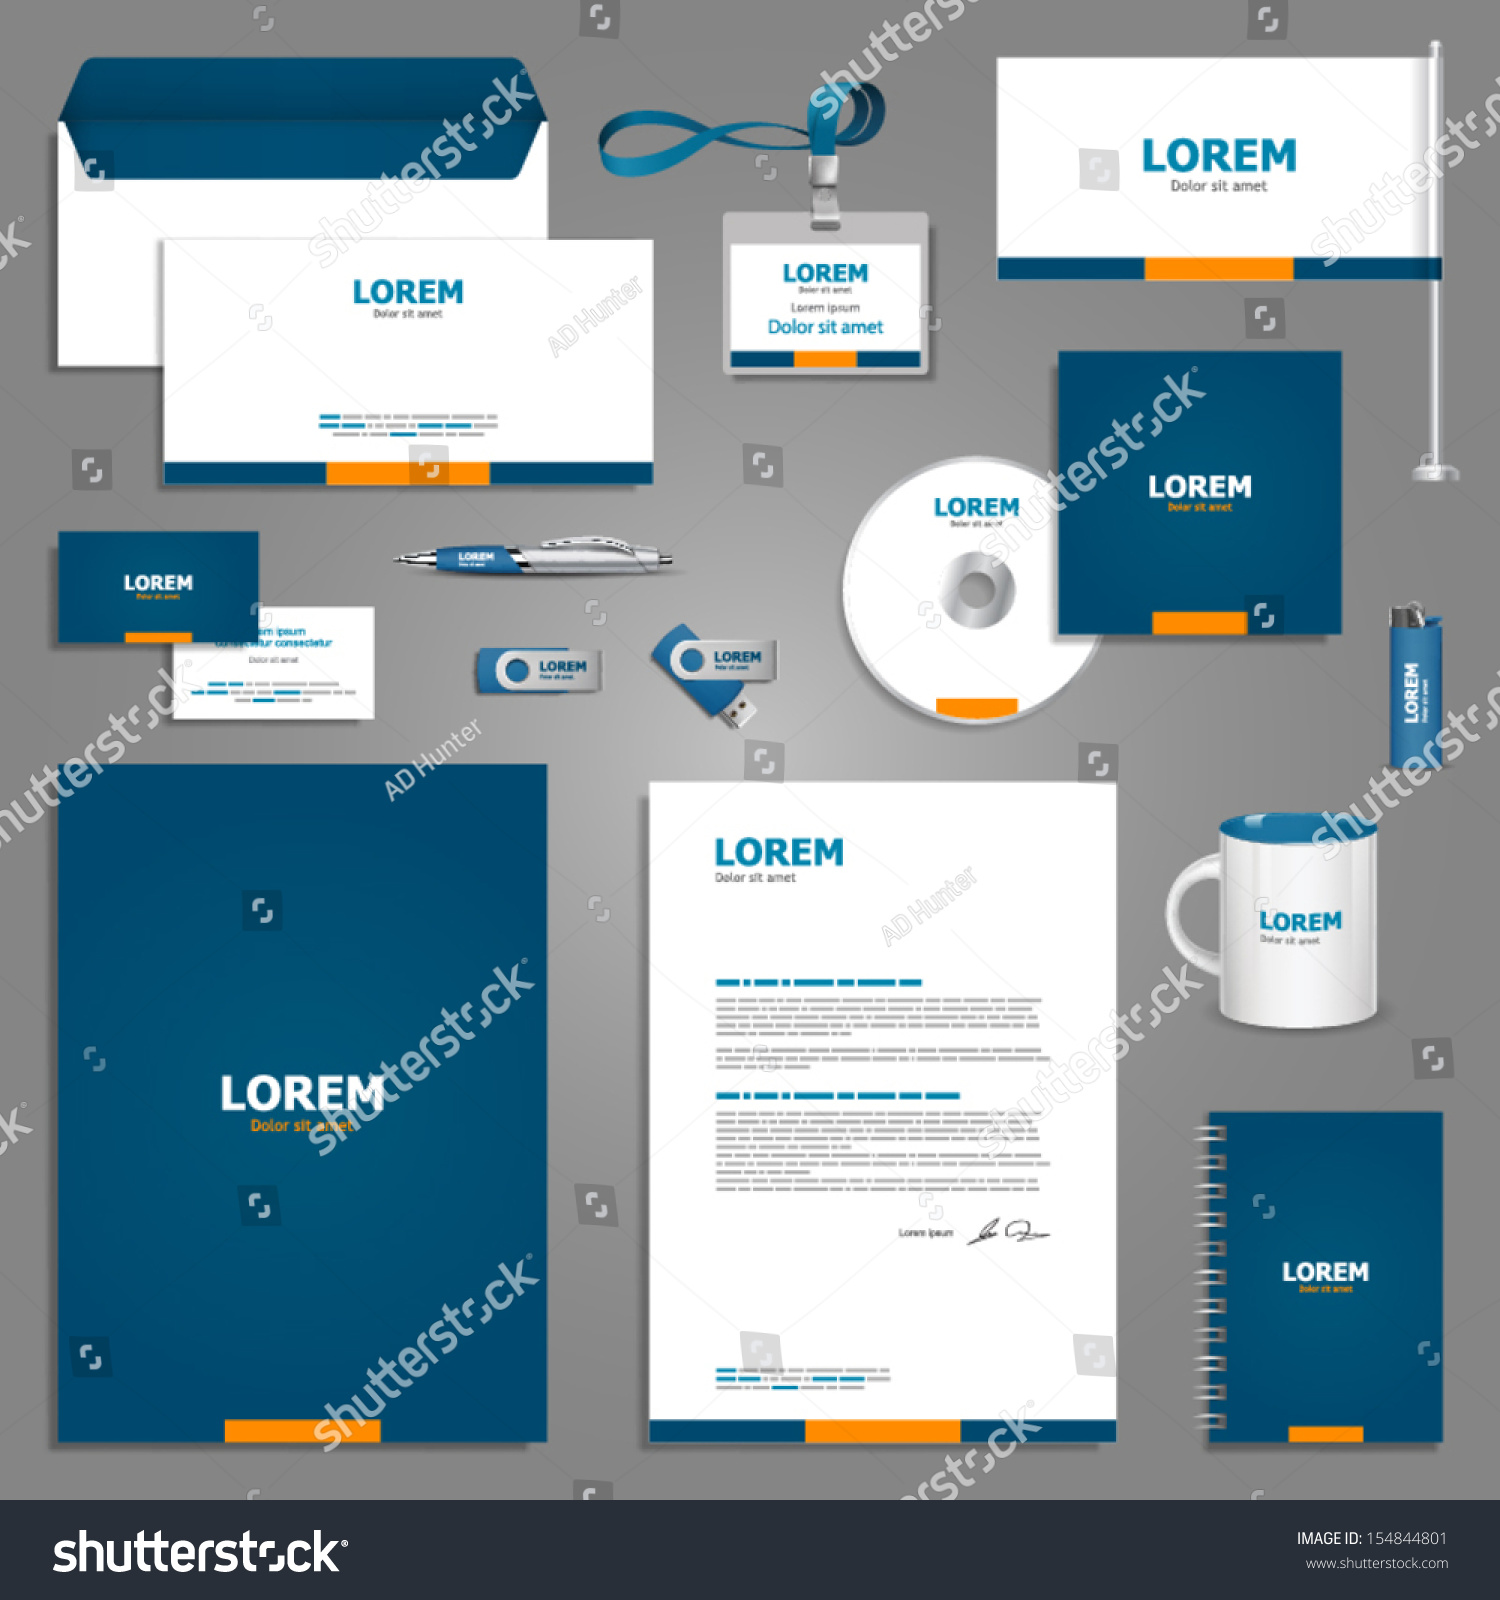 Classic stationery template design. Documentation for business. #154844801